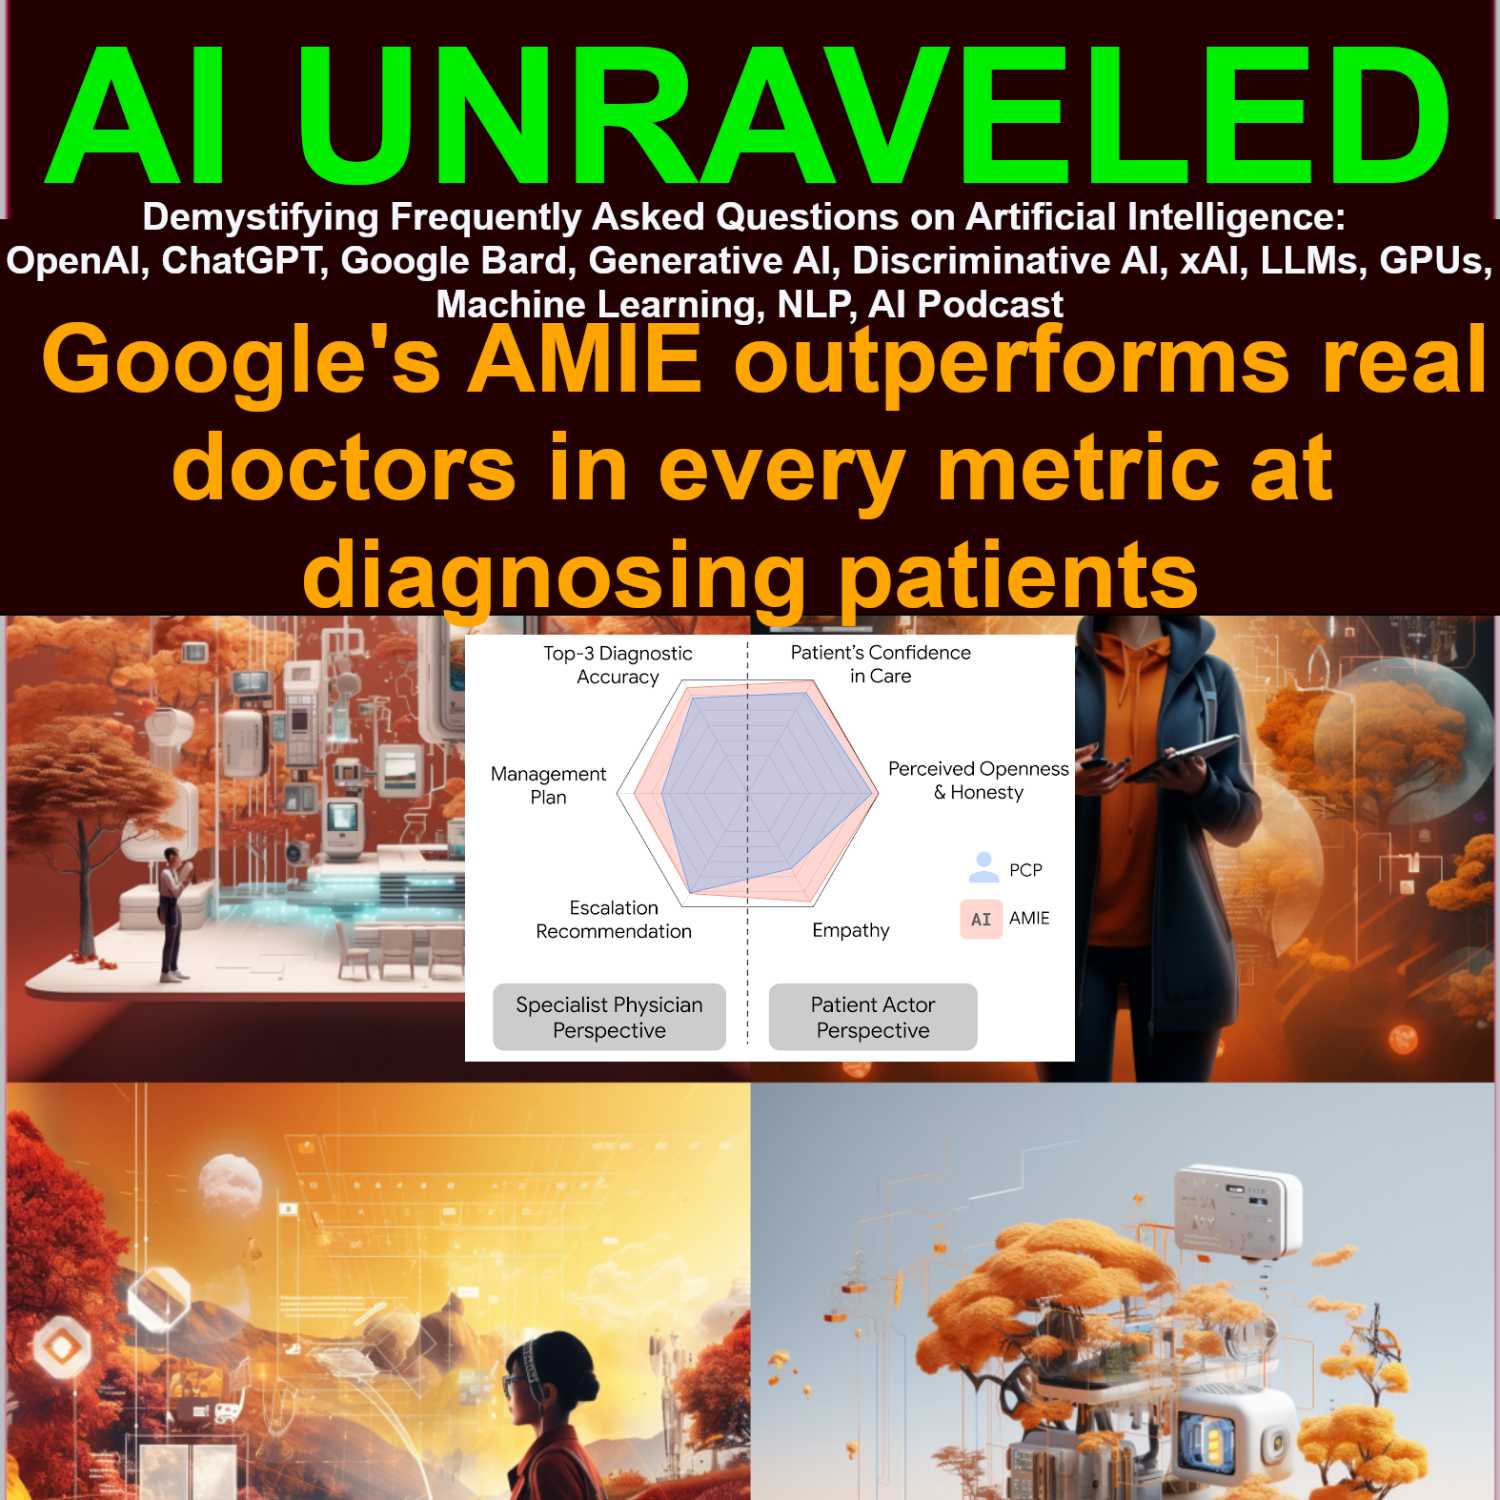 Revolution in Healthcare: Google's AI (AMIE) Surpasses Doctors in Patient Diagnosis - A Detailed Analysis